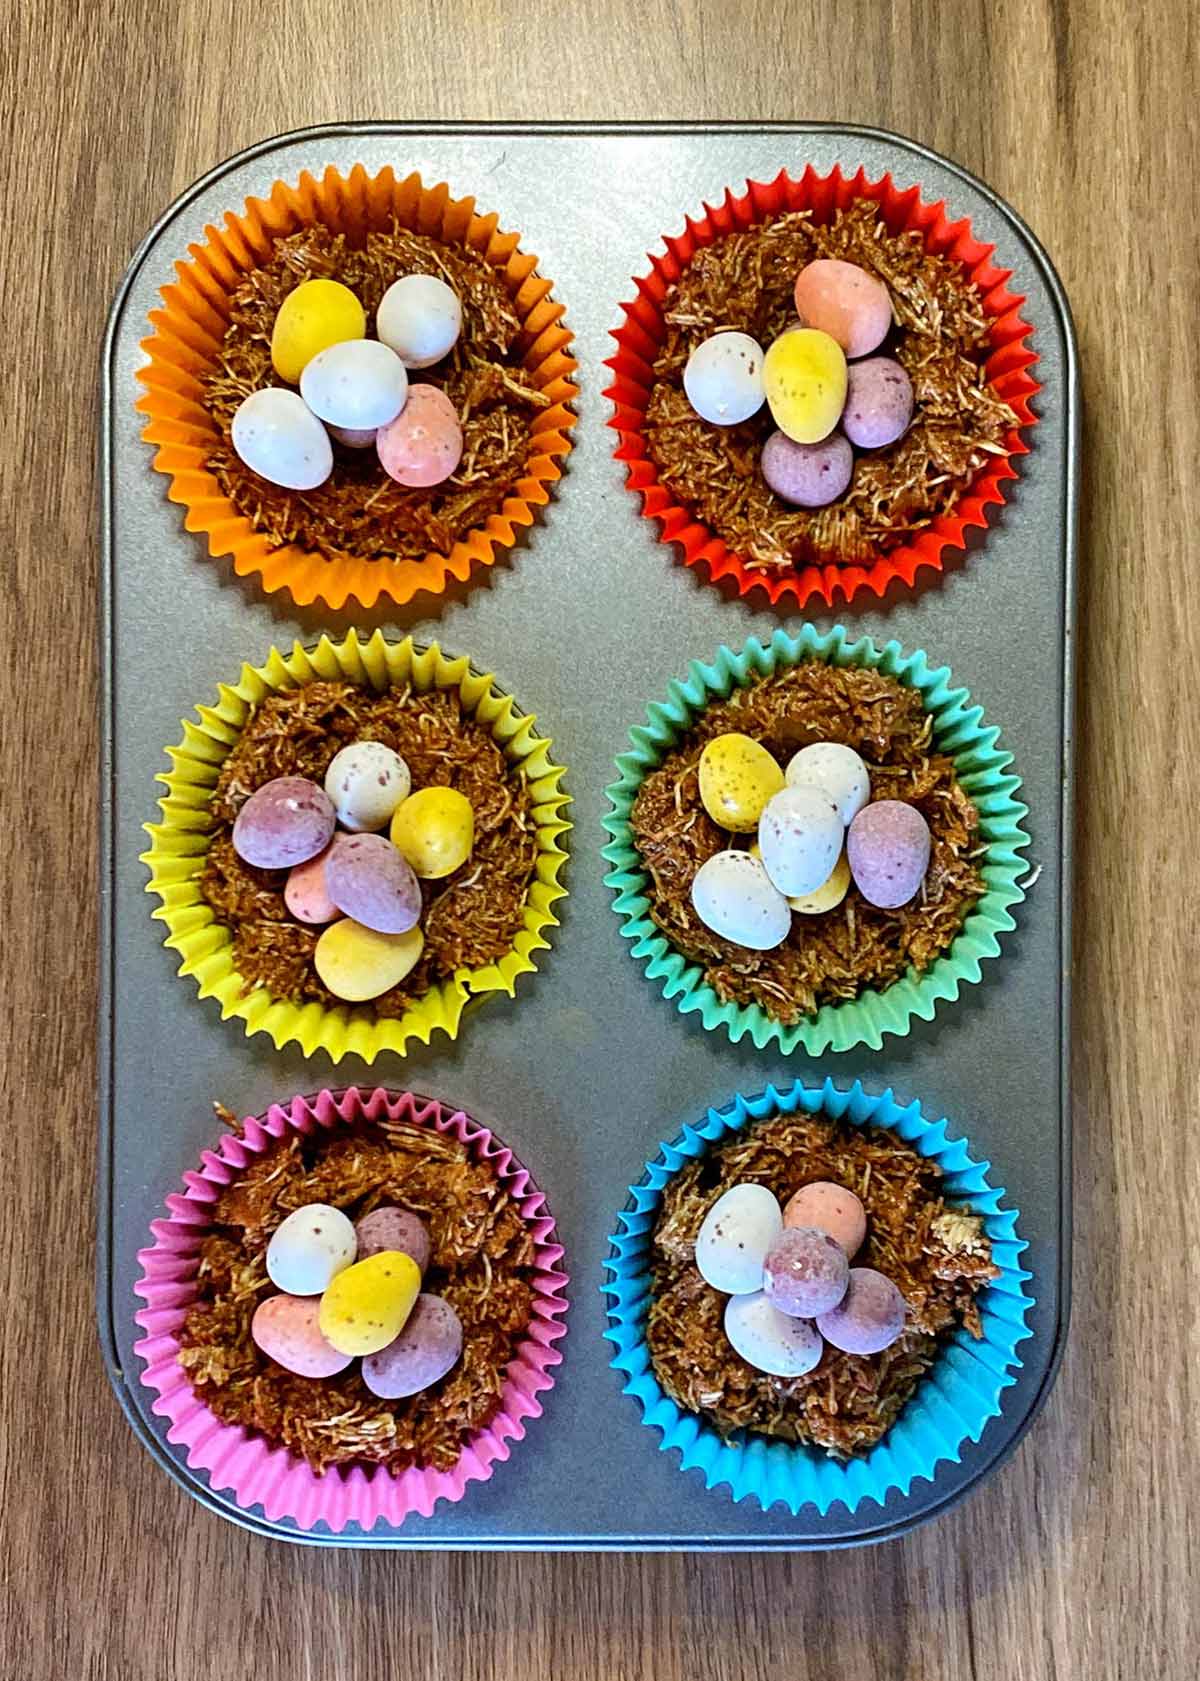 Mini eggs added to the nests.